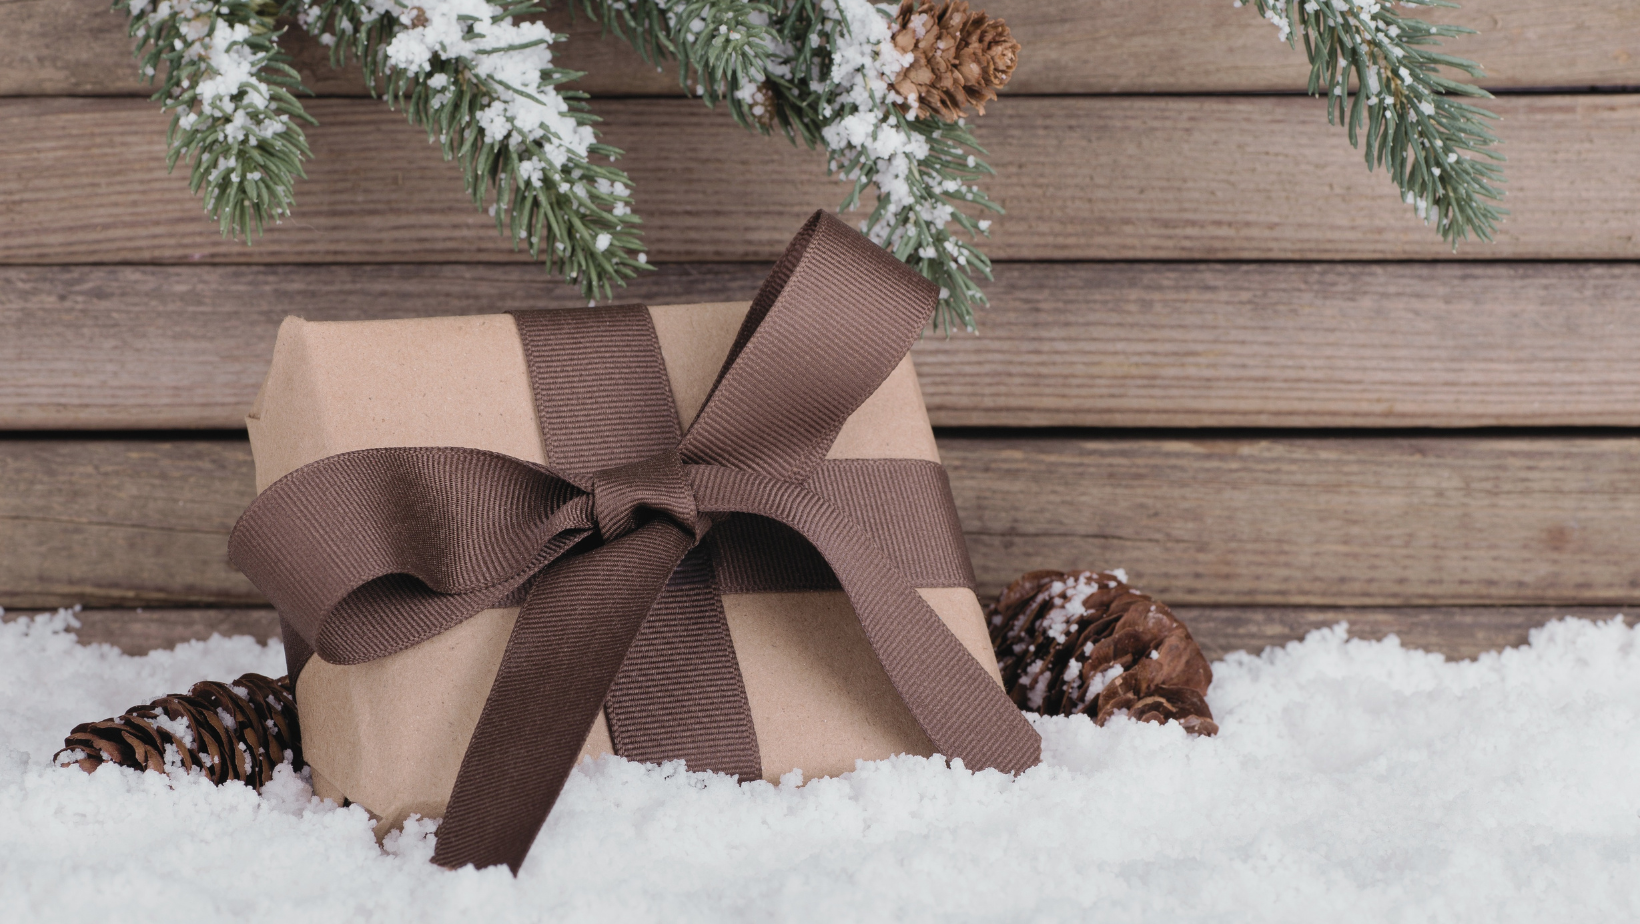 Gift wrapped in brown paper with ribbon sitting in snow.